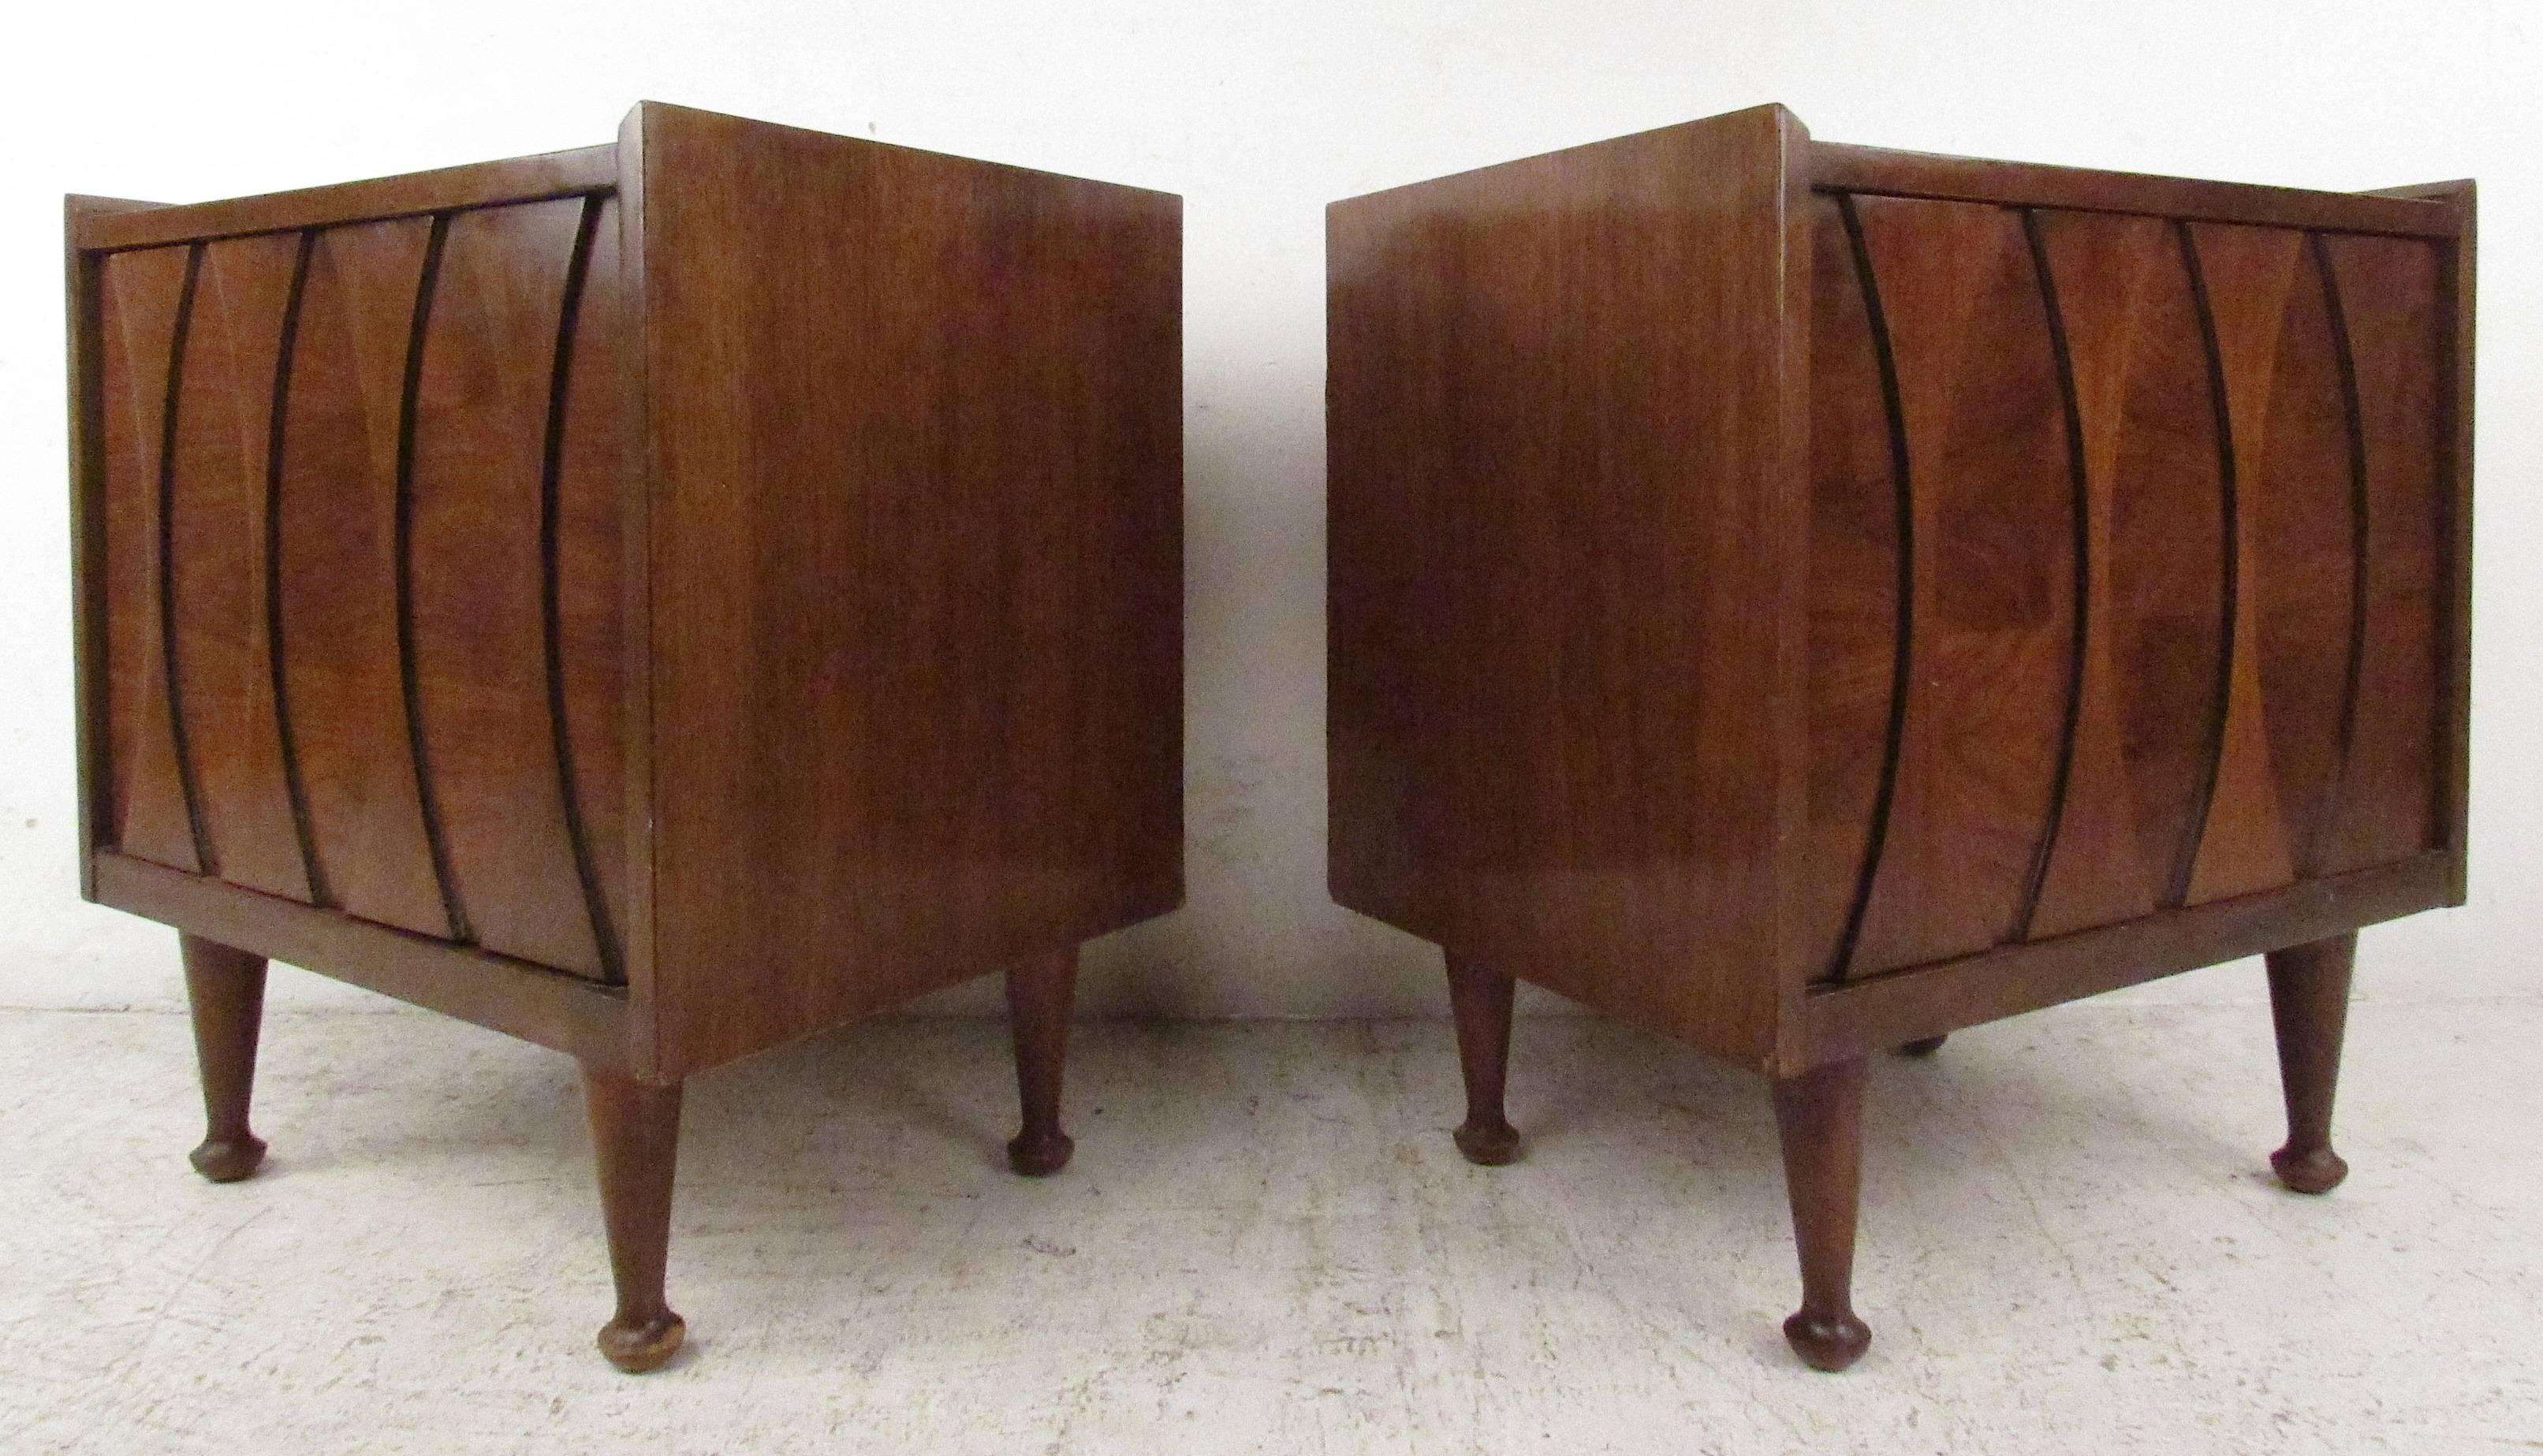 Pair of walnut nightstands with stationary shelf by Hoke Wood Products. Mid-Century Modern bedside end tables with sculpted applied fronts, tapered drumstick legs, and rich vintage wood finish. Please confirm item location (NY or NJ) with